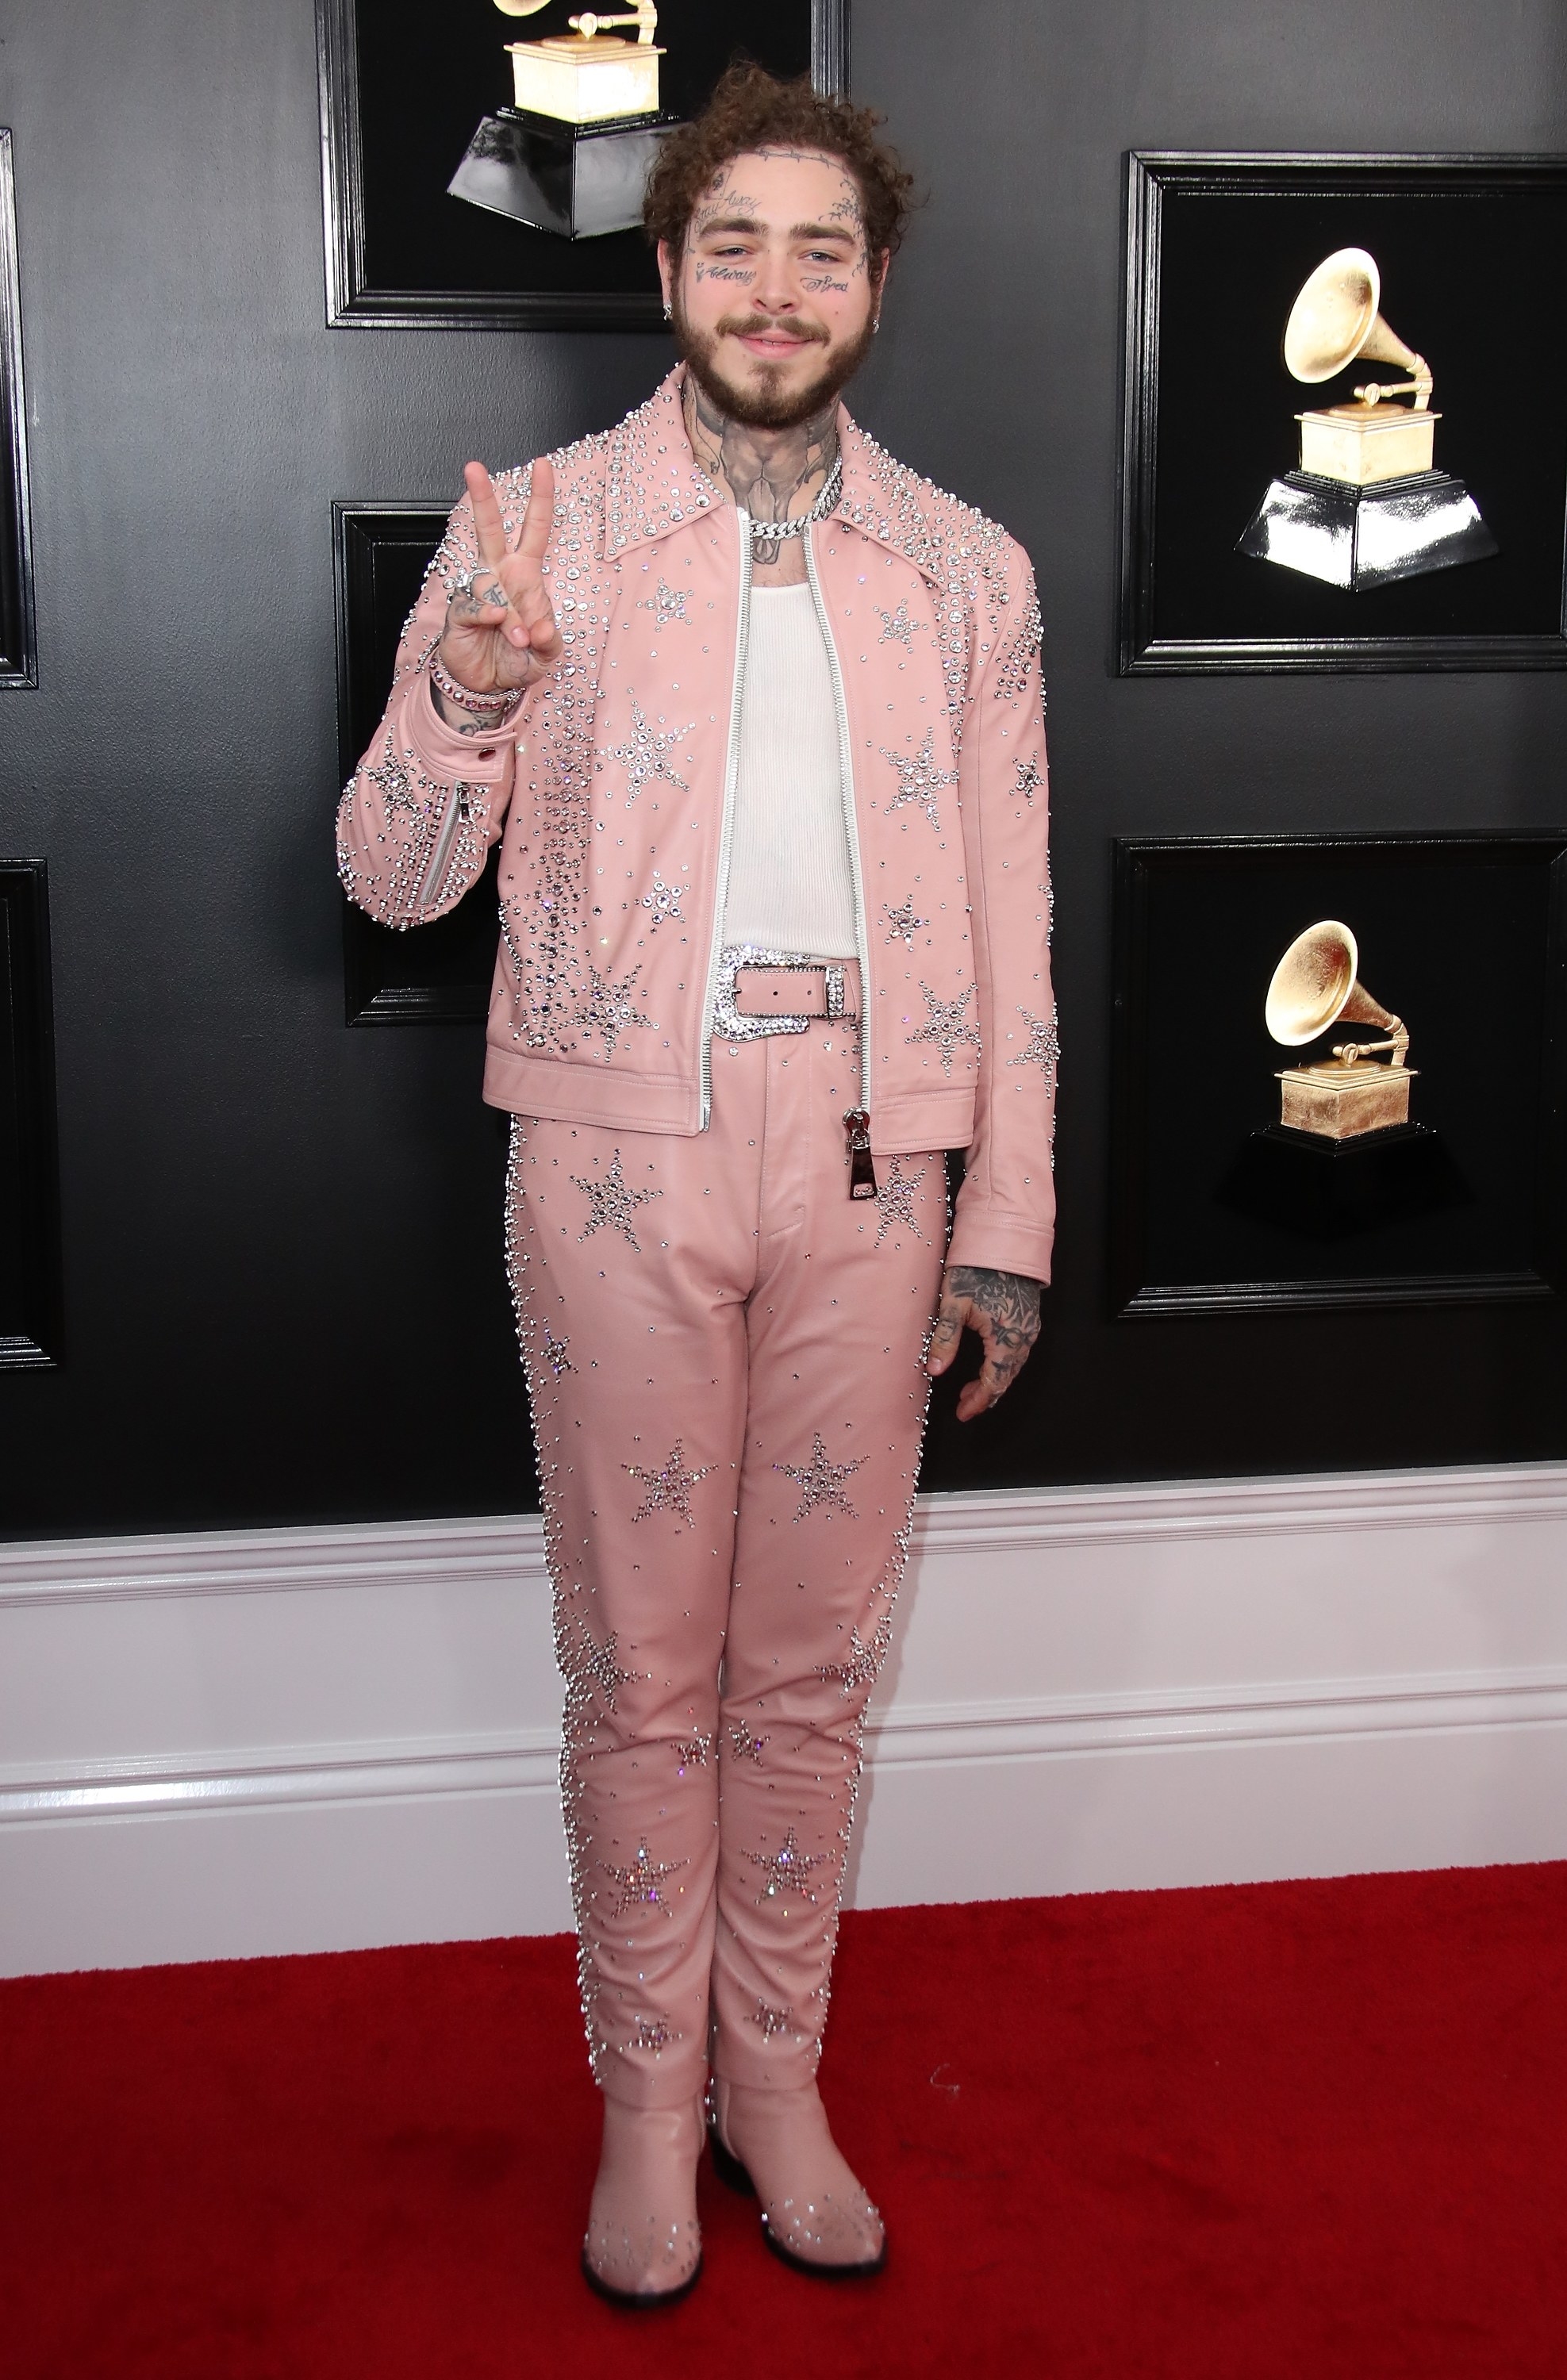 Post Malone wearing the outfit